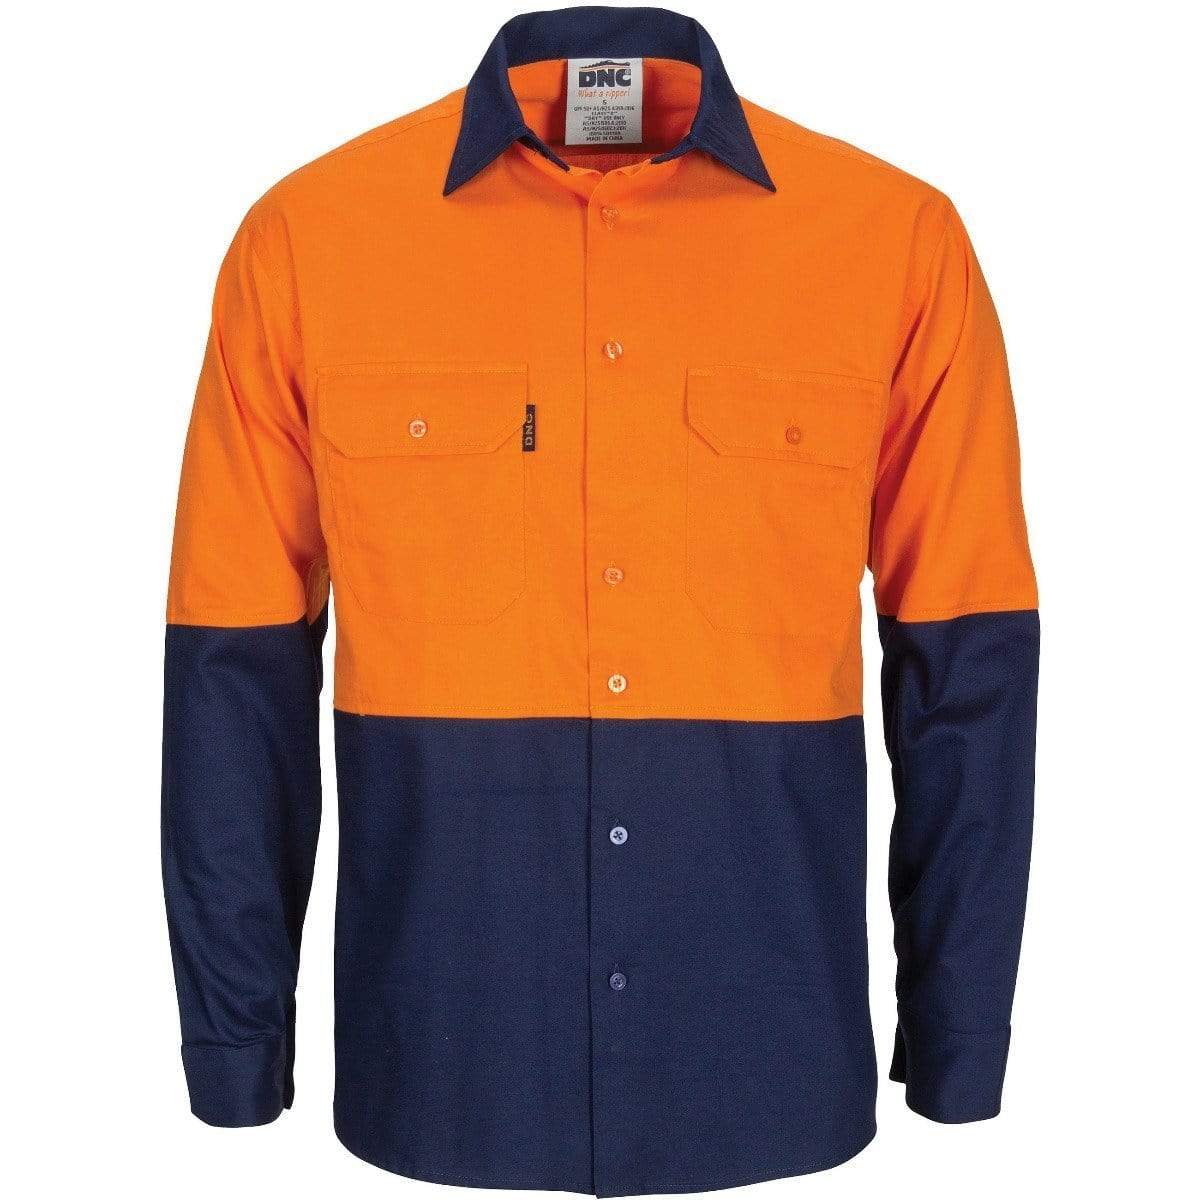 DNC WORKWEAR Hi-Vis L/W Cool-Breeze T2 Vertical Vented Long Sleeve Cotton Shirt with Gusset Sleeves  3733 Work Wear DNC Workwear Orange/Navy XS 